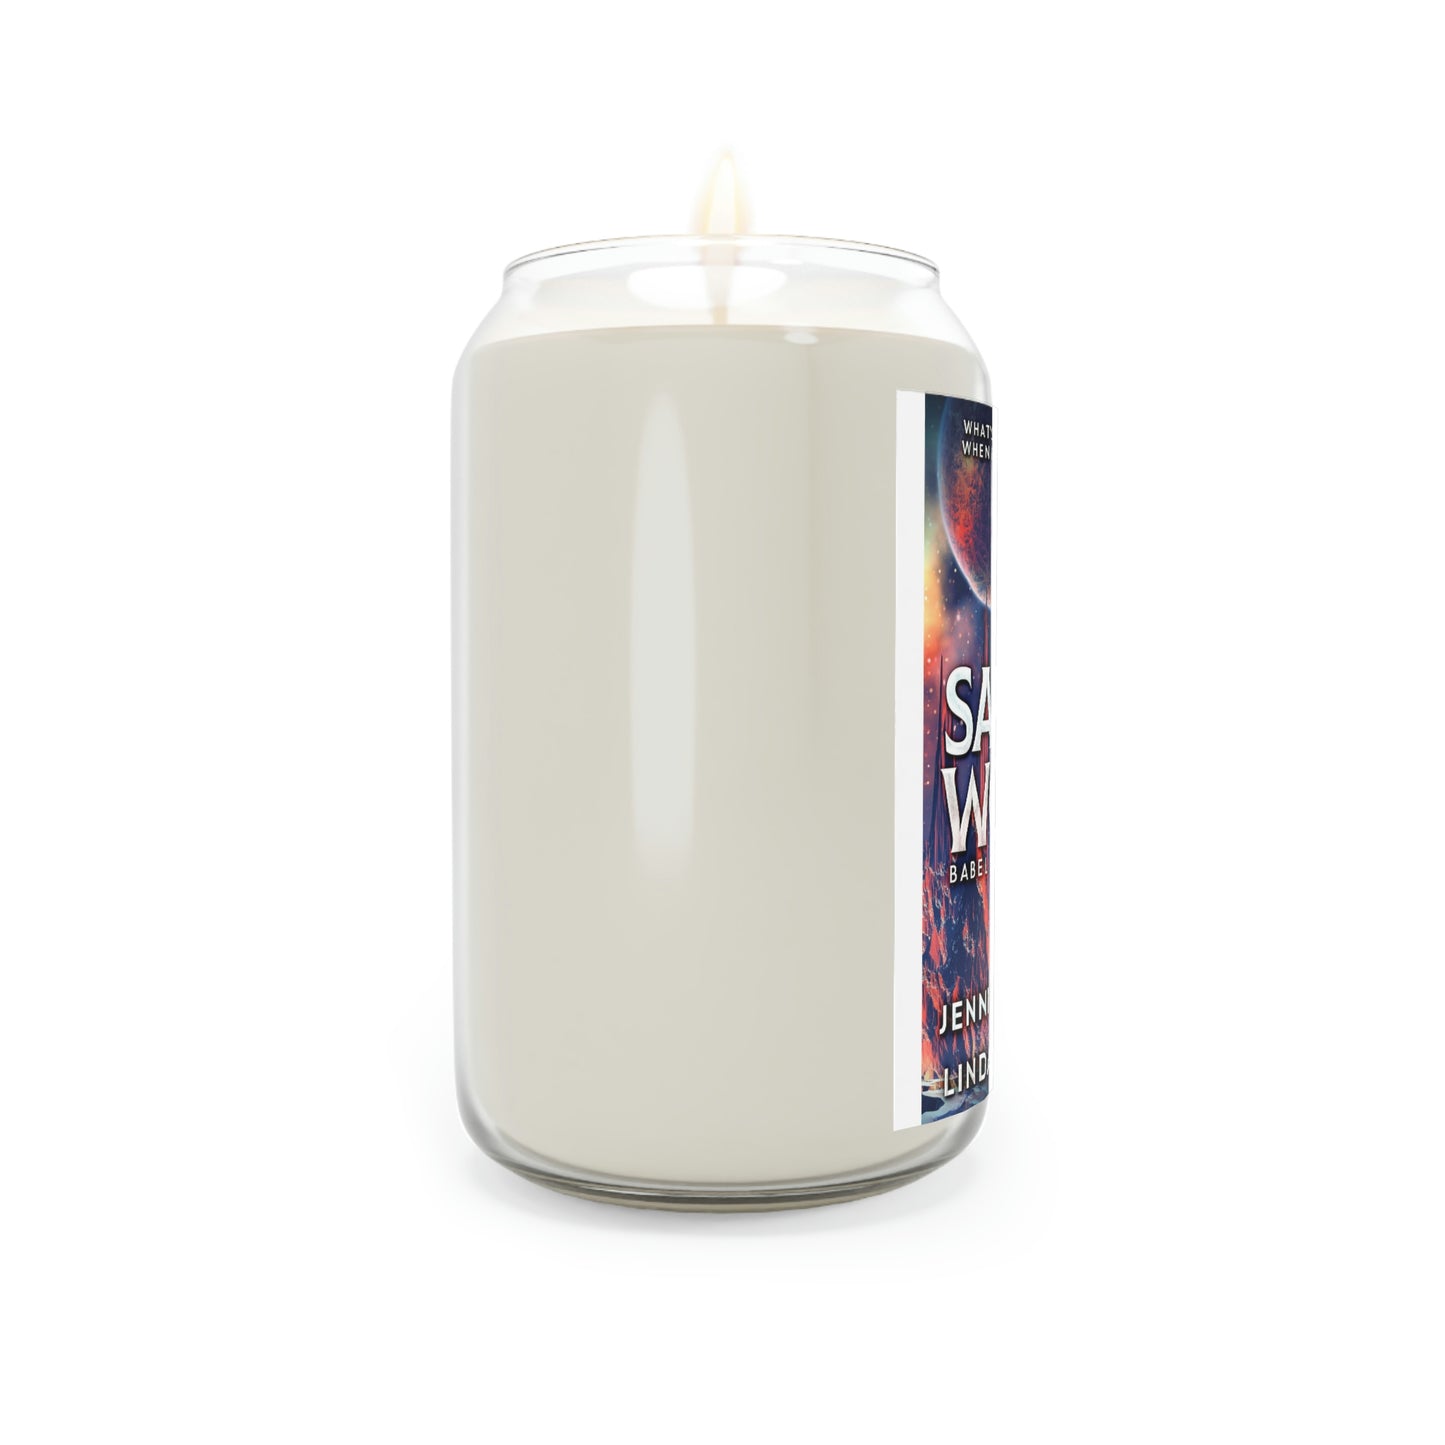 Savage World - Scented Candle